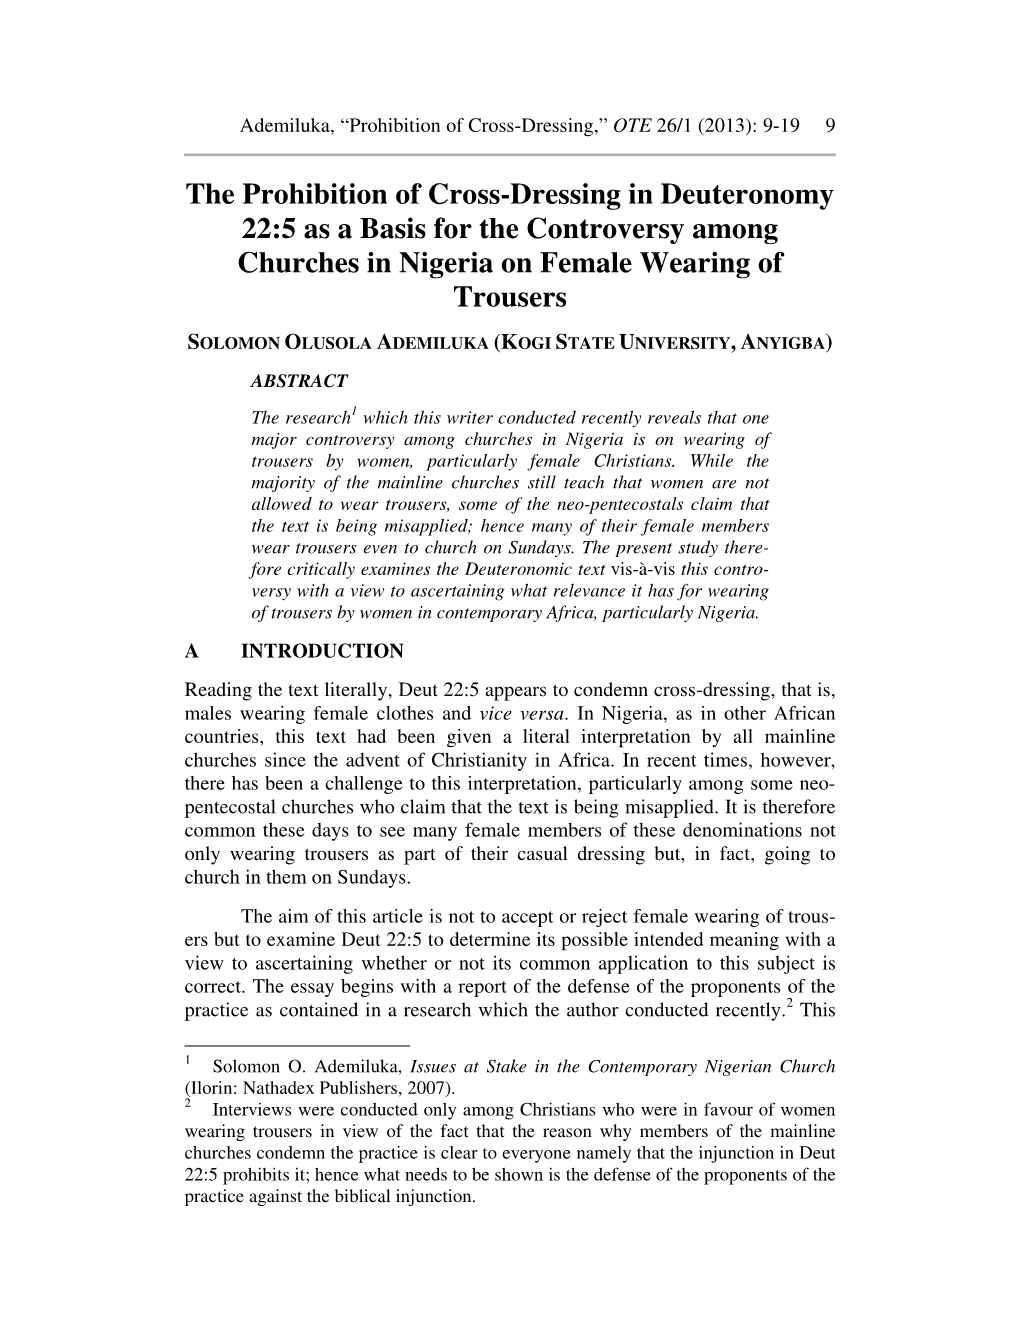 The Prohibition of Cross-Dressing in Deuteronomy 22:5 As a Basis for the Controversy Among Churches in Nigeria on Female Wearing of Trousers